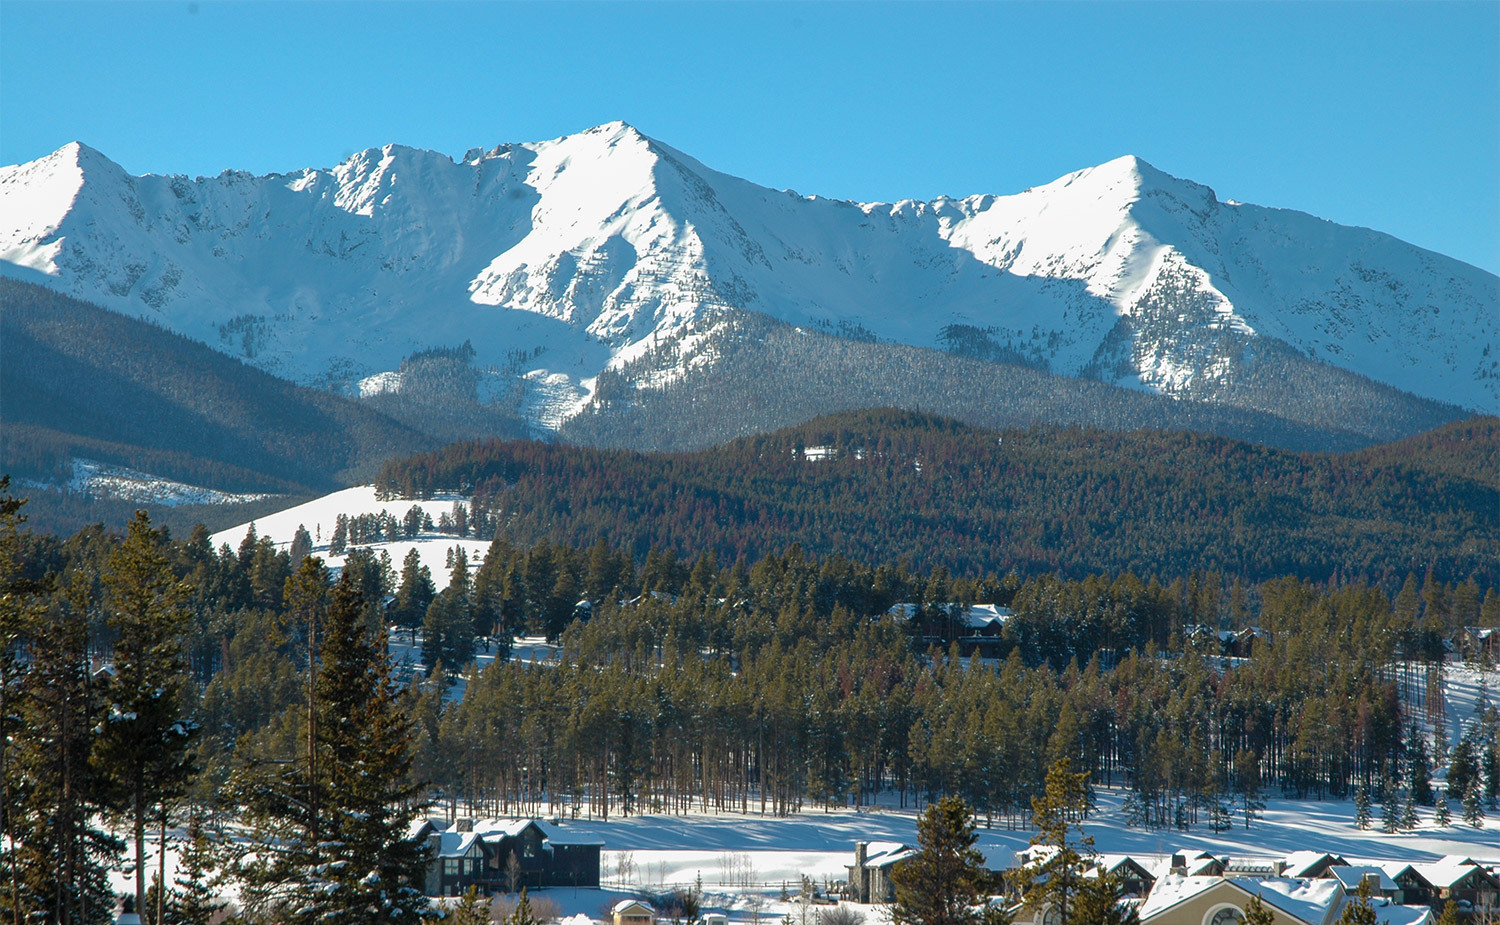 Tenmile Range as seen from the east where Muggins Gulch is located